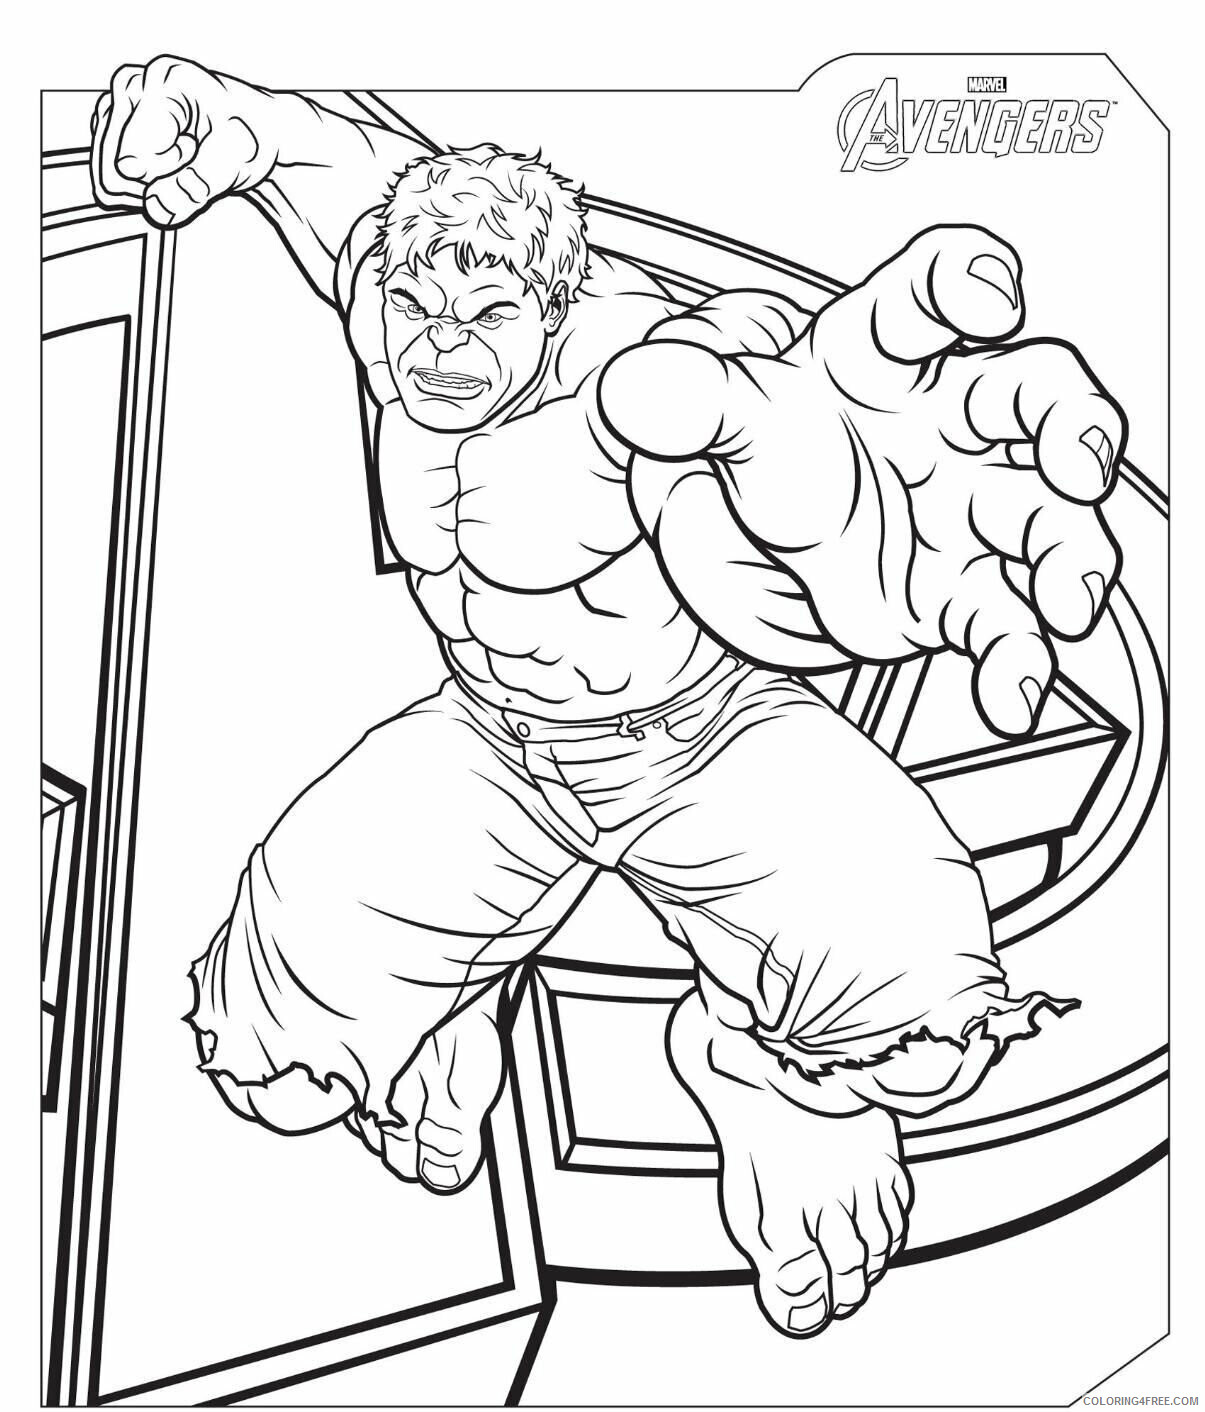 Avengers Coloring Pages to Print Printable Sheets avengers Google Search 2021 a 4158 Coloring4free